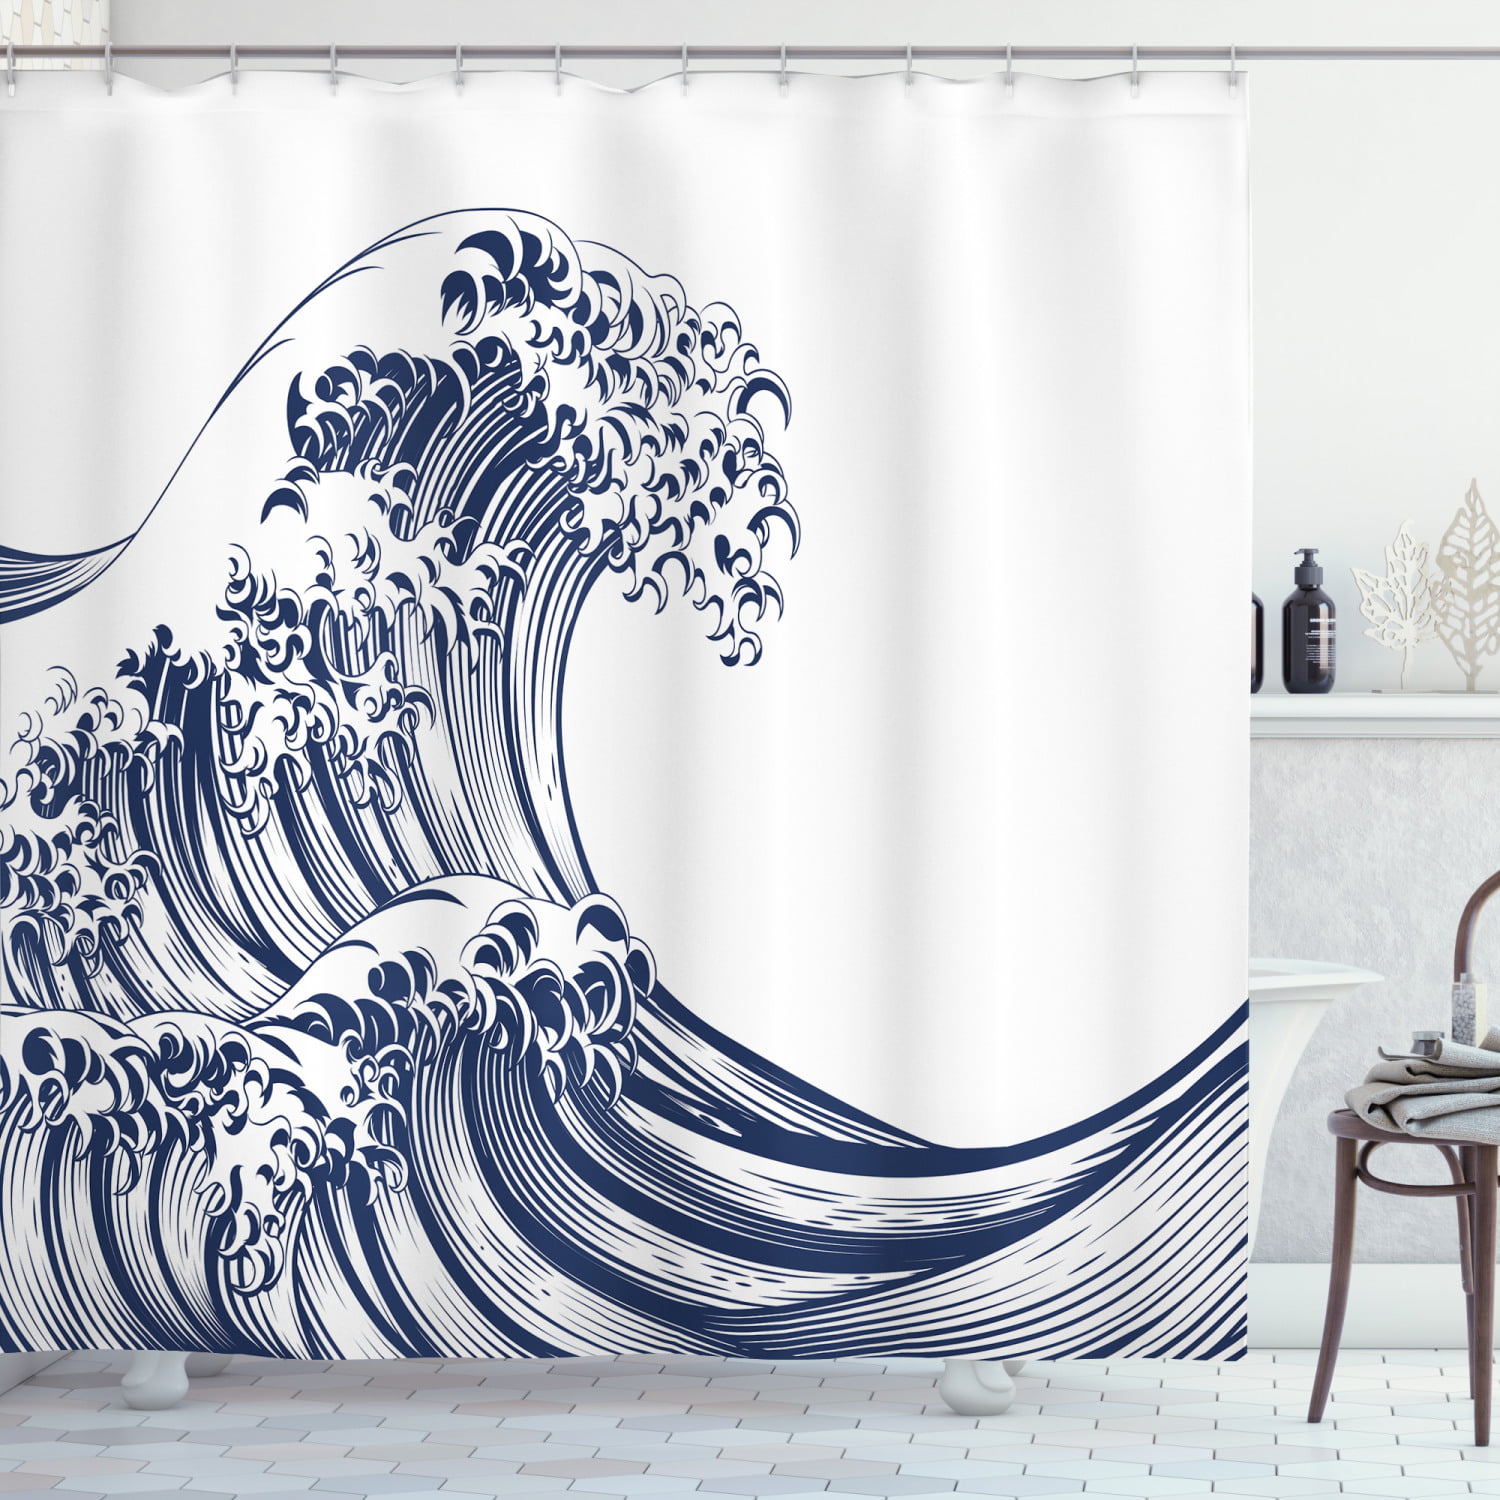 Japanese Crane With Wave Shower Curtain Liner 12 Hooks Bathroom Accessory Sets 